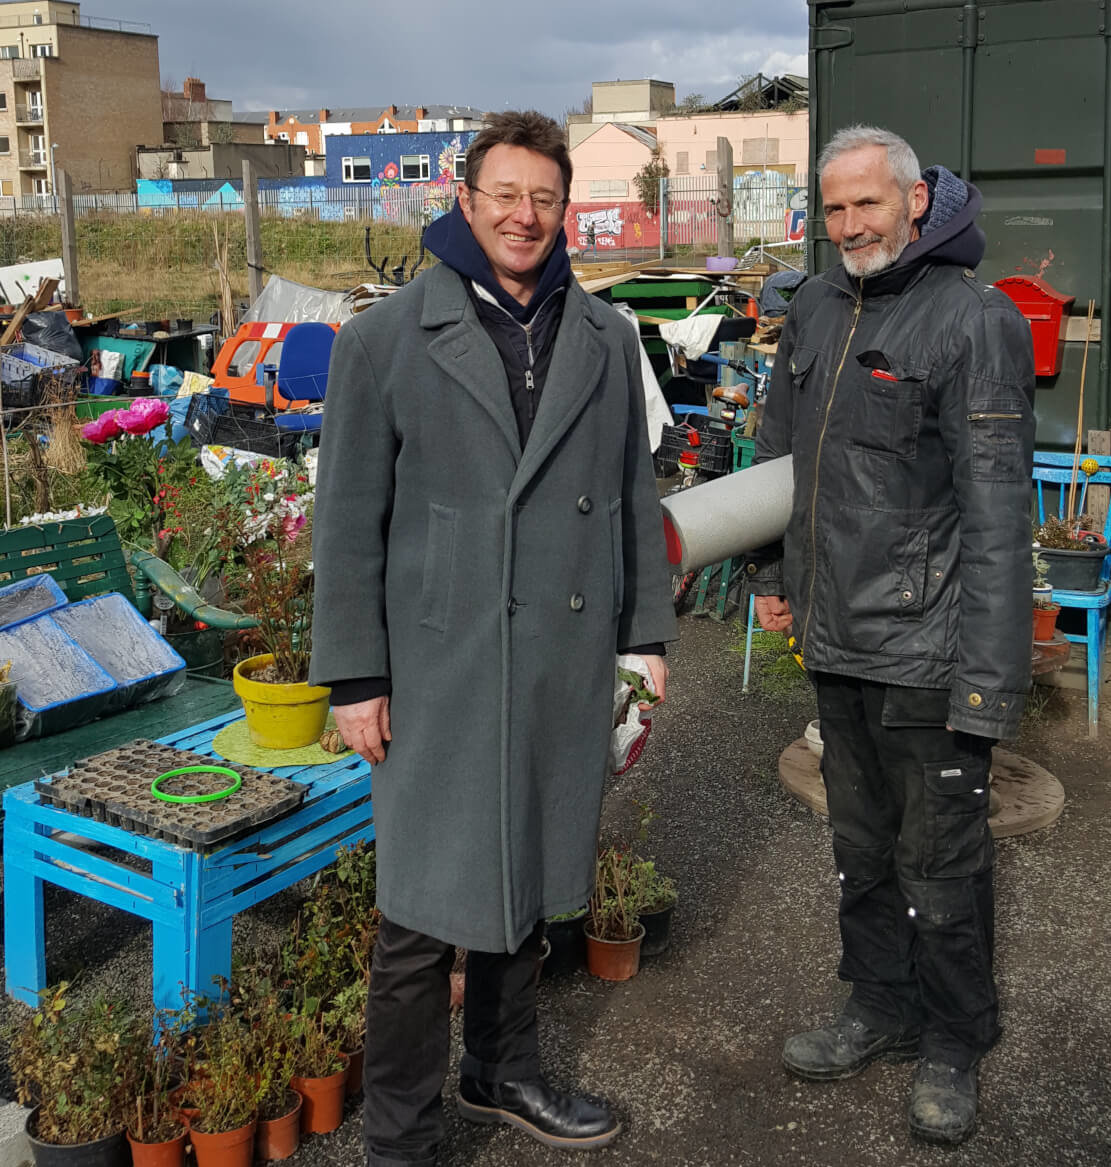 Bridgefoot Street Community Gardeners Robert Moss and Richard Taplin brave the hail showers at lunch time to meet with Lisa from the Guinness Enterprise Centre. Photo: Lisa Doyle.